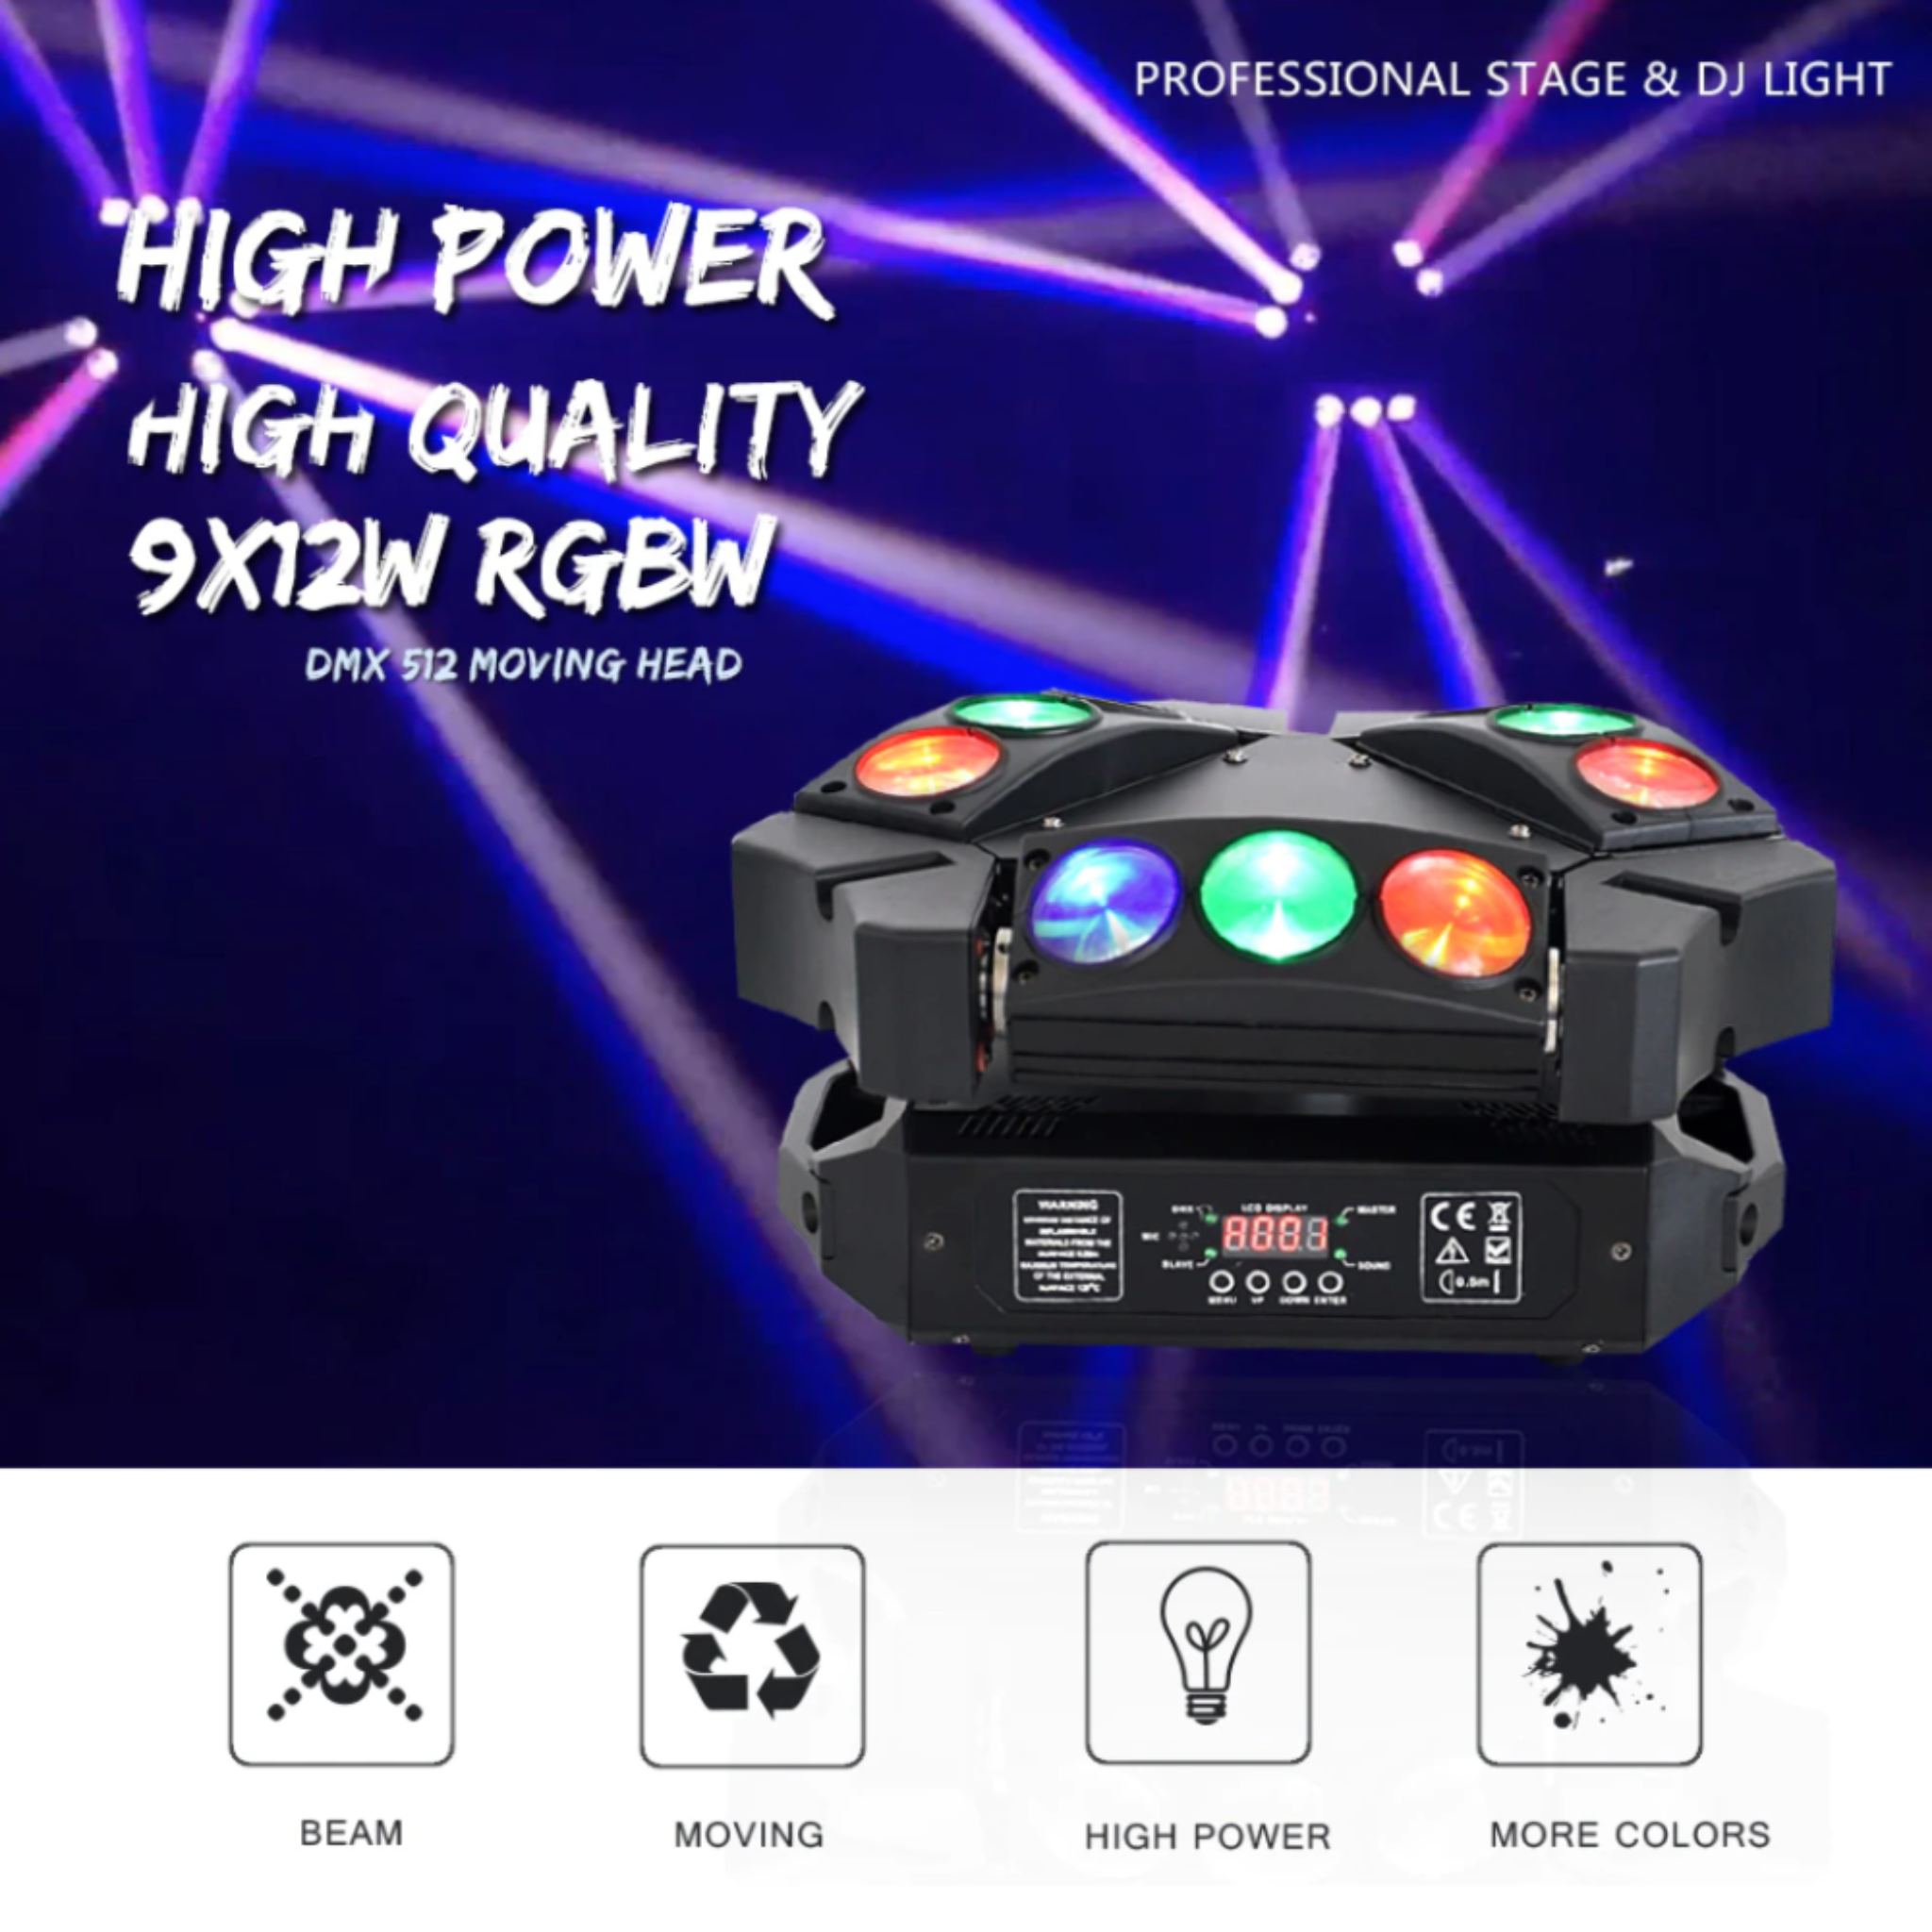 Stage Lights Spider Moving Head Dj Light, 15 CH,Sound Activated DMX 512 ,for Disco,Party,Show,DJ Booth,Wedding